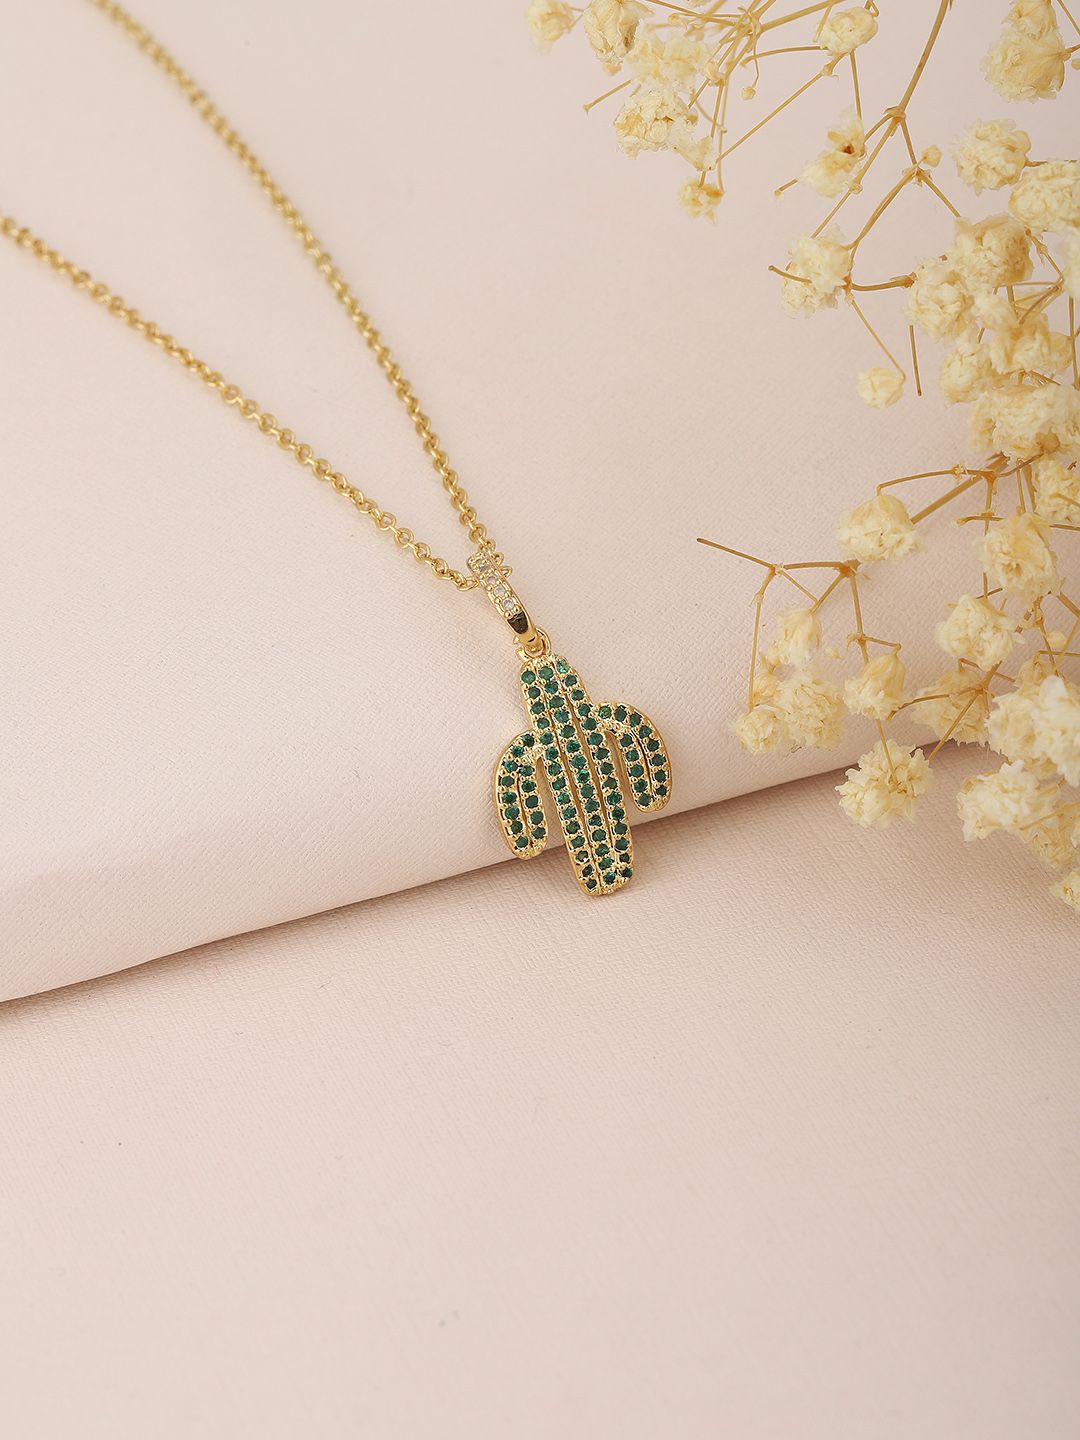 Carlton London Green & Gold-Toned Brass Cactus Shaped Stone Studded Necklace Price in India